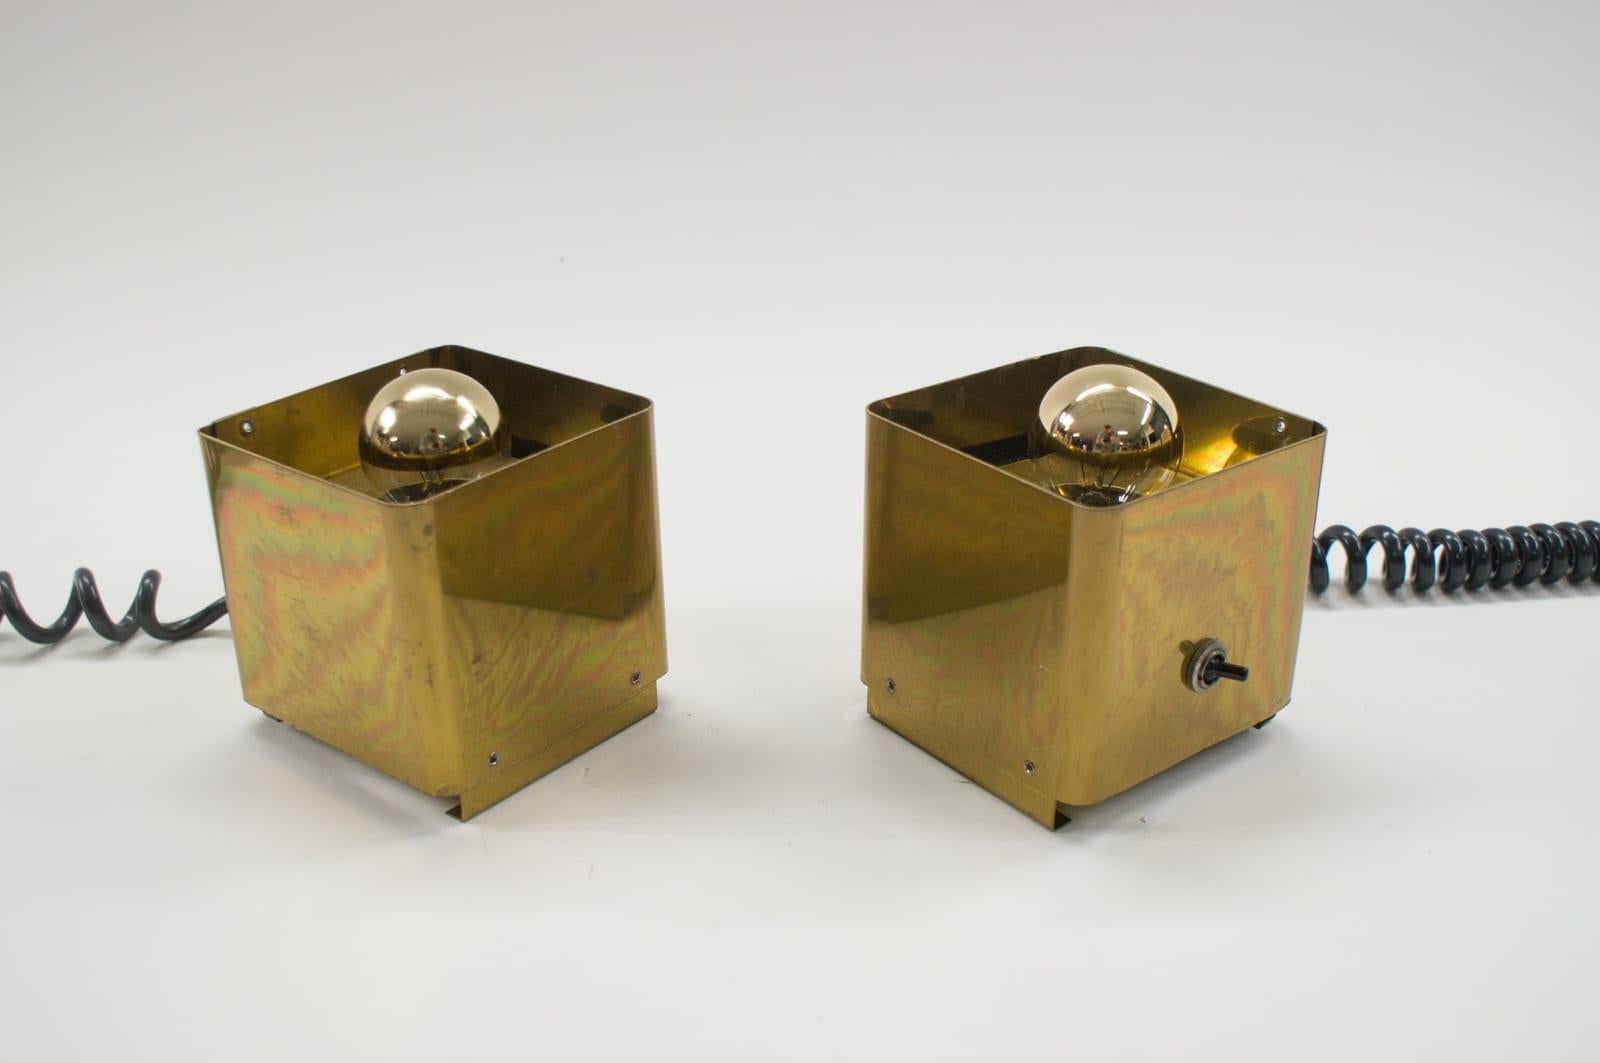 Austrian Pair of Midcentury Cube Table Lamps in Brass, 1960s For Sale